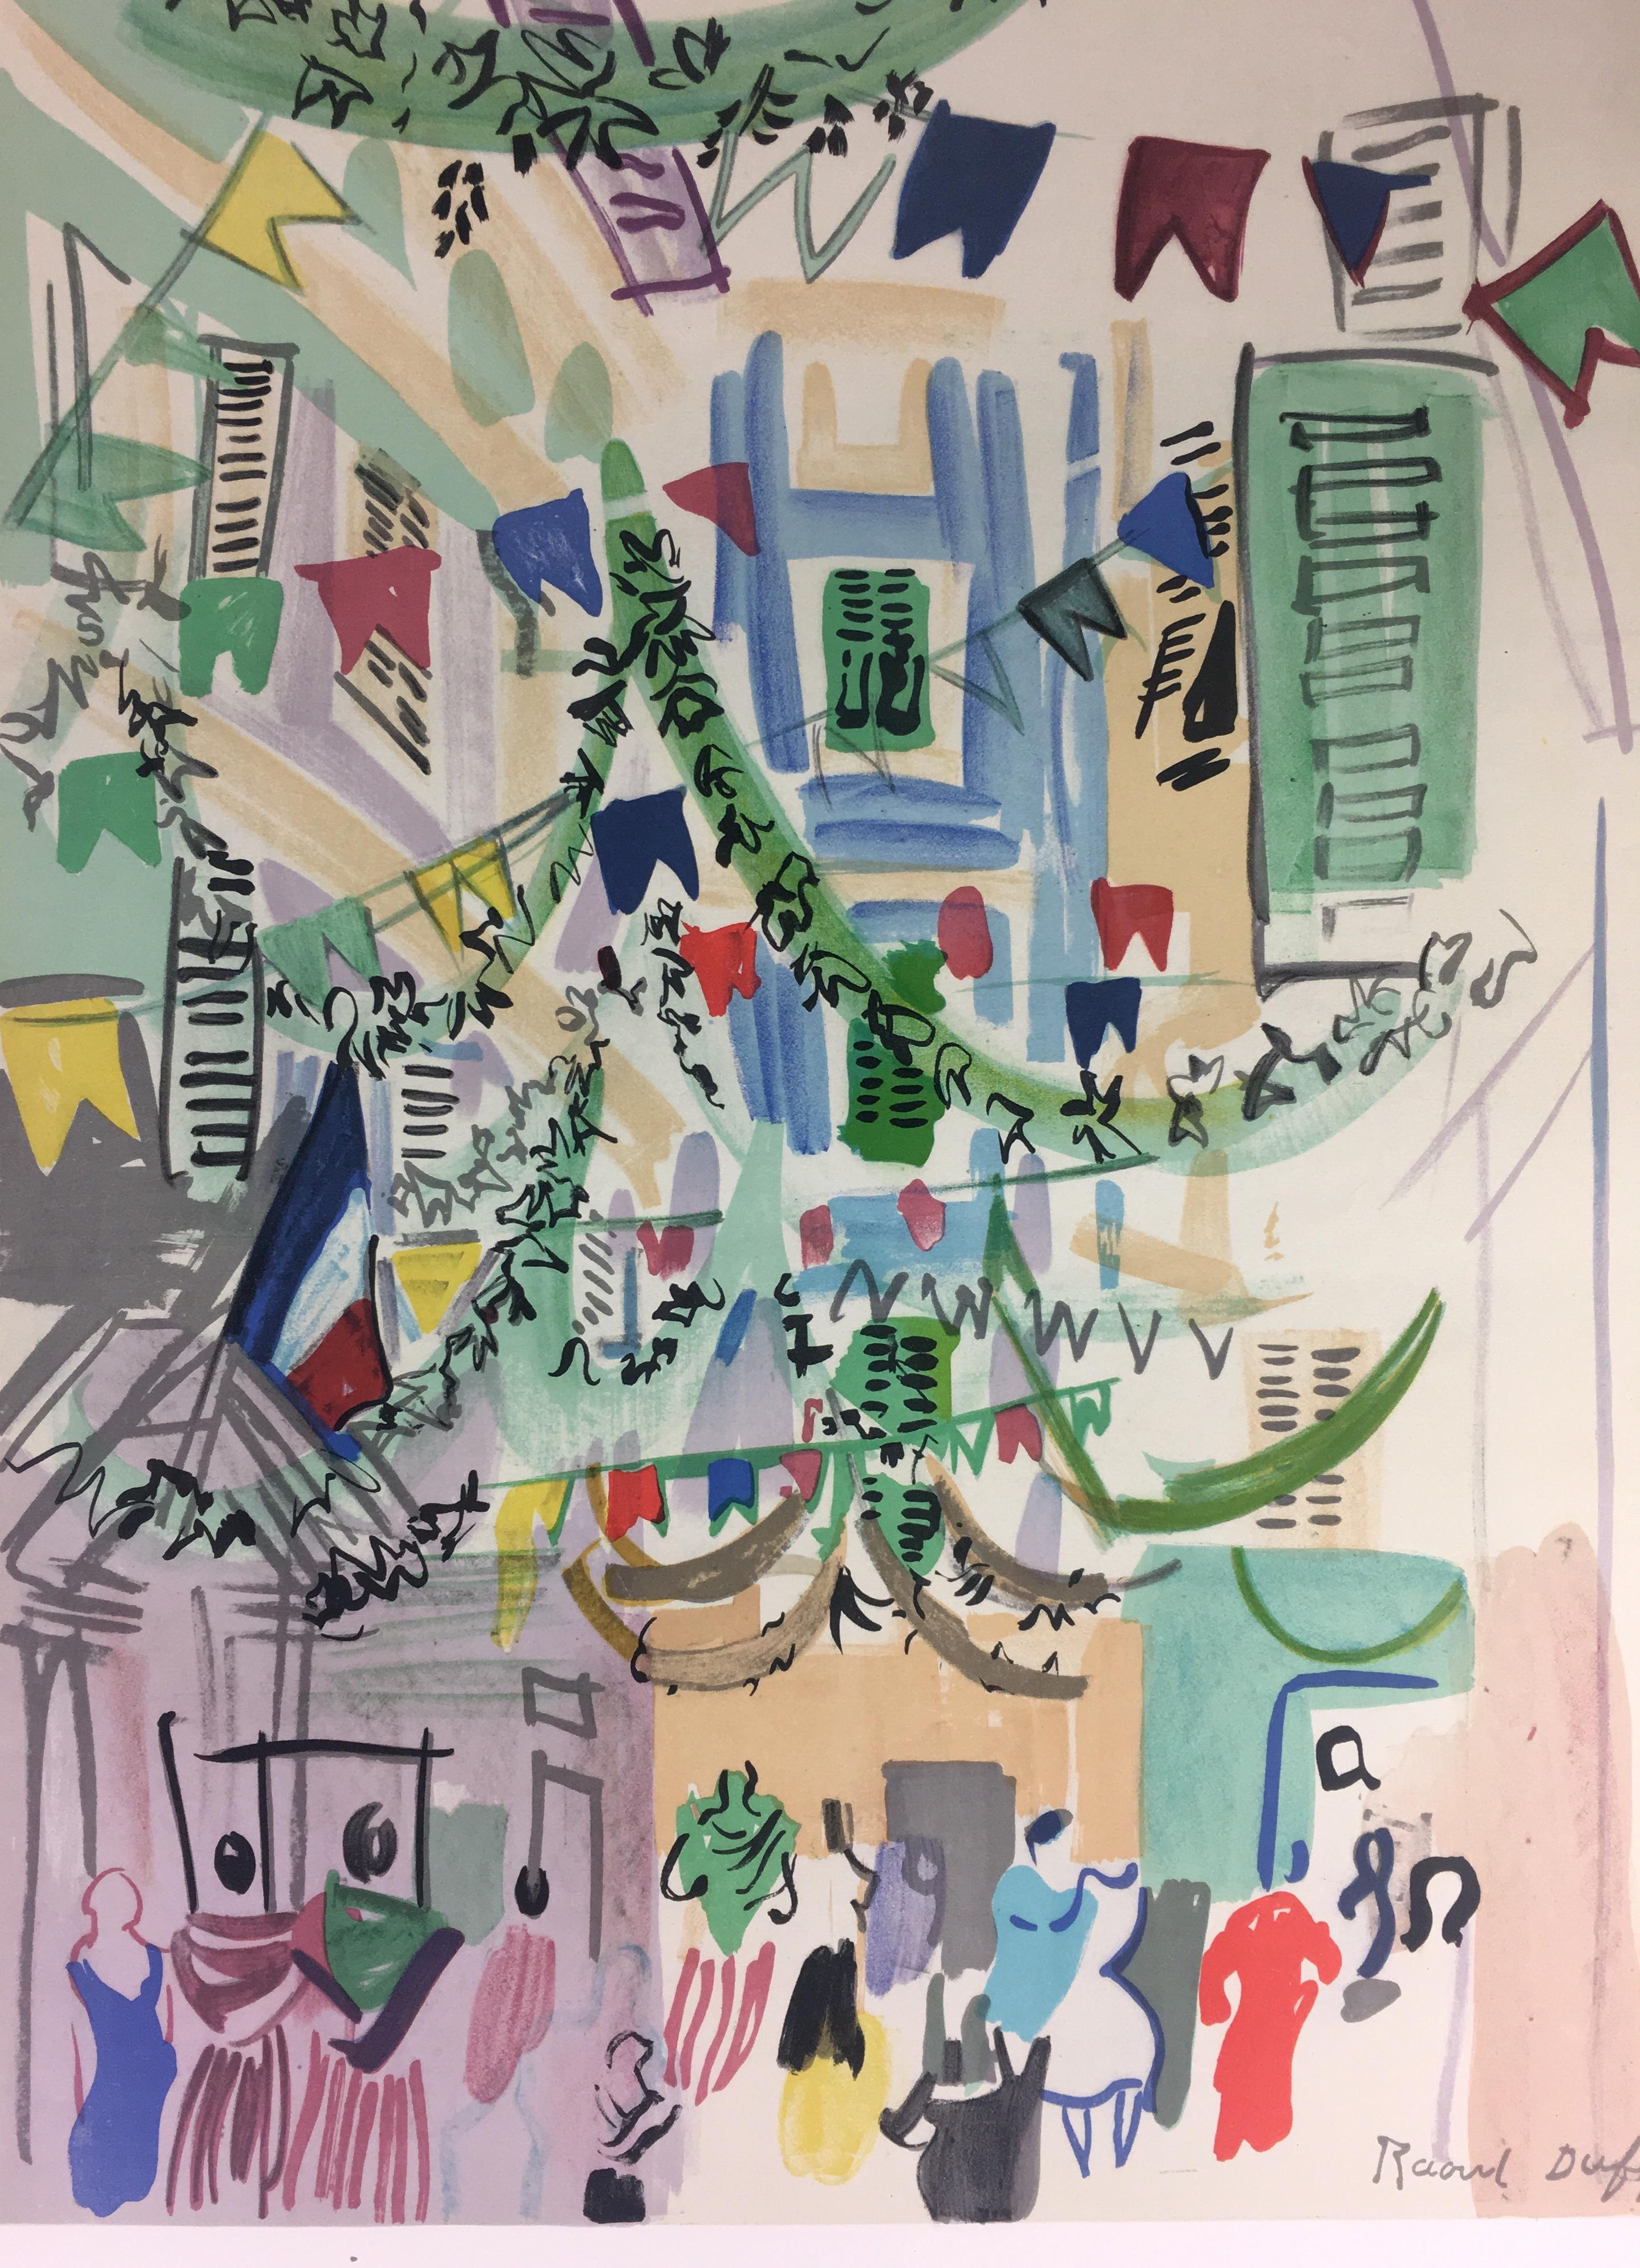 Original midcentury Raoul Dufy art poster from the 1950s printed by Mourlot, Paris. 

Raoul Dufy was a renowned artist that created excellent works of art in both contemporary and Mid-Century Modern styles. 

The printer, Atelier Mourlot,